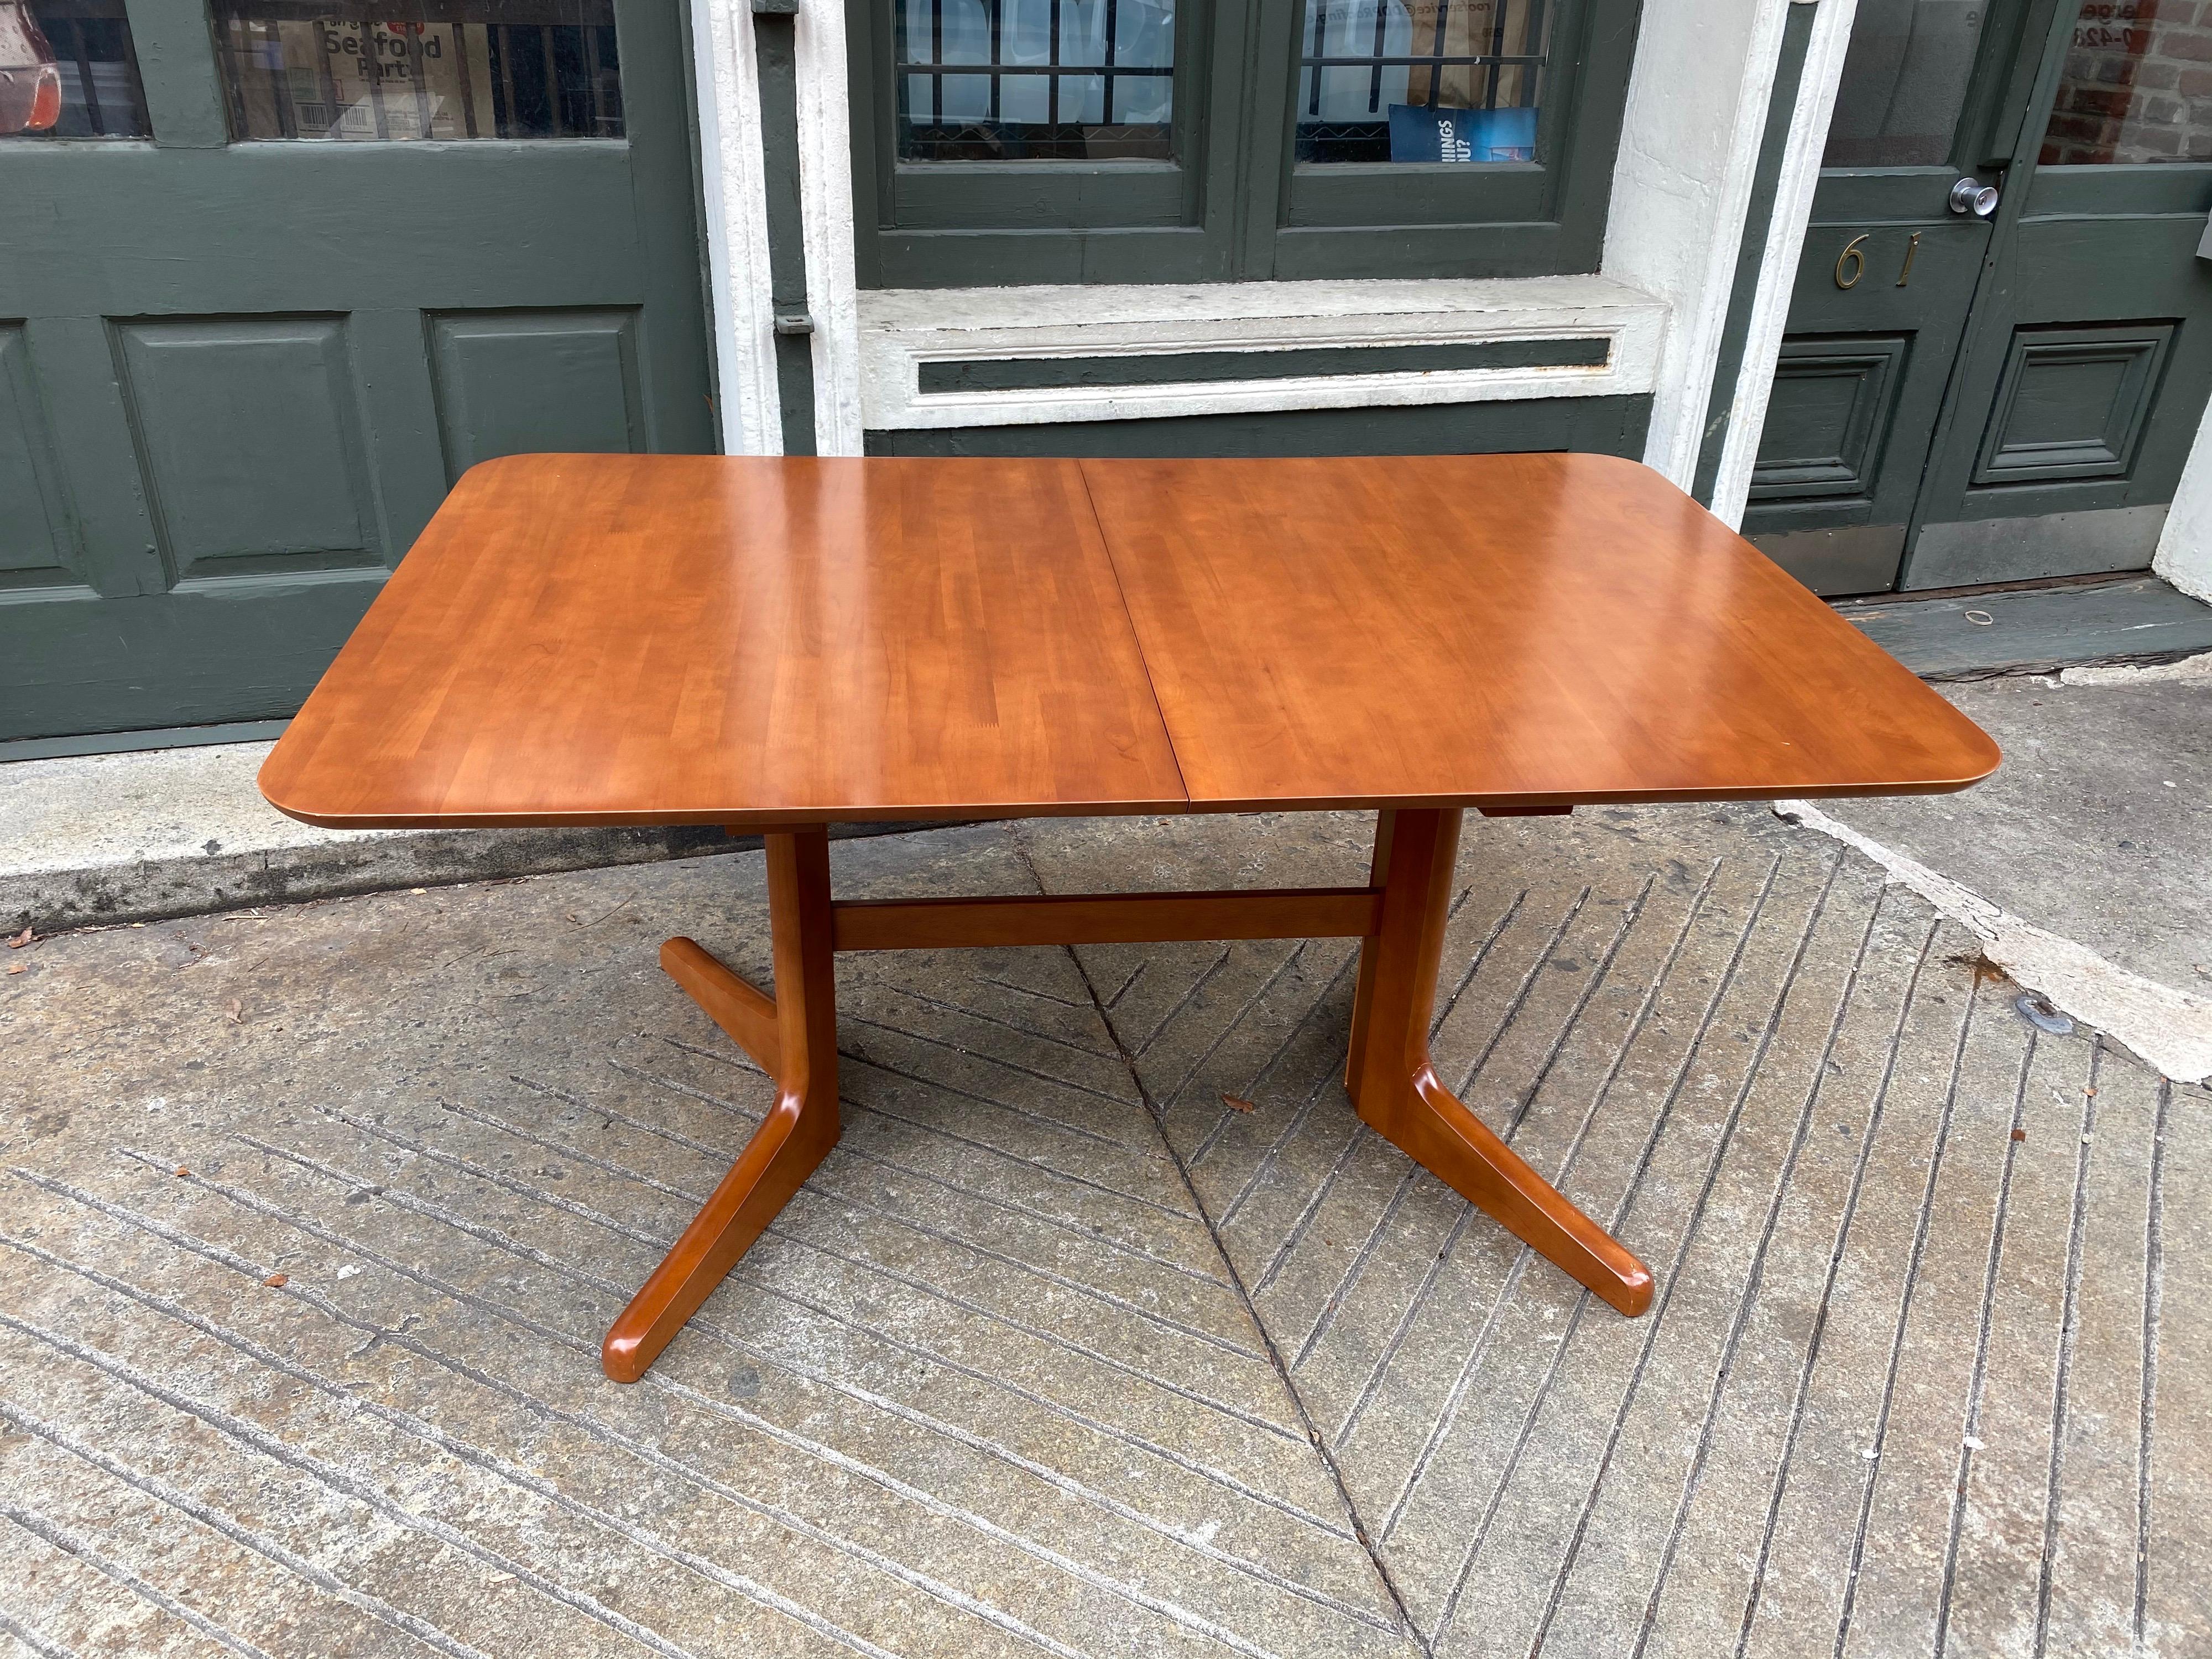 Wood Dane Decor Dining Table with 1 Leaf